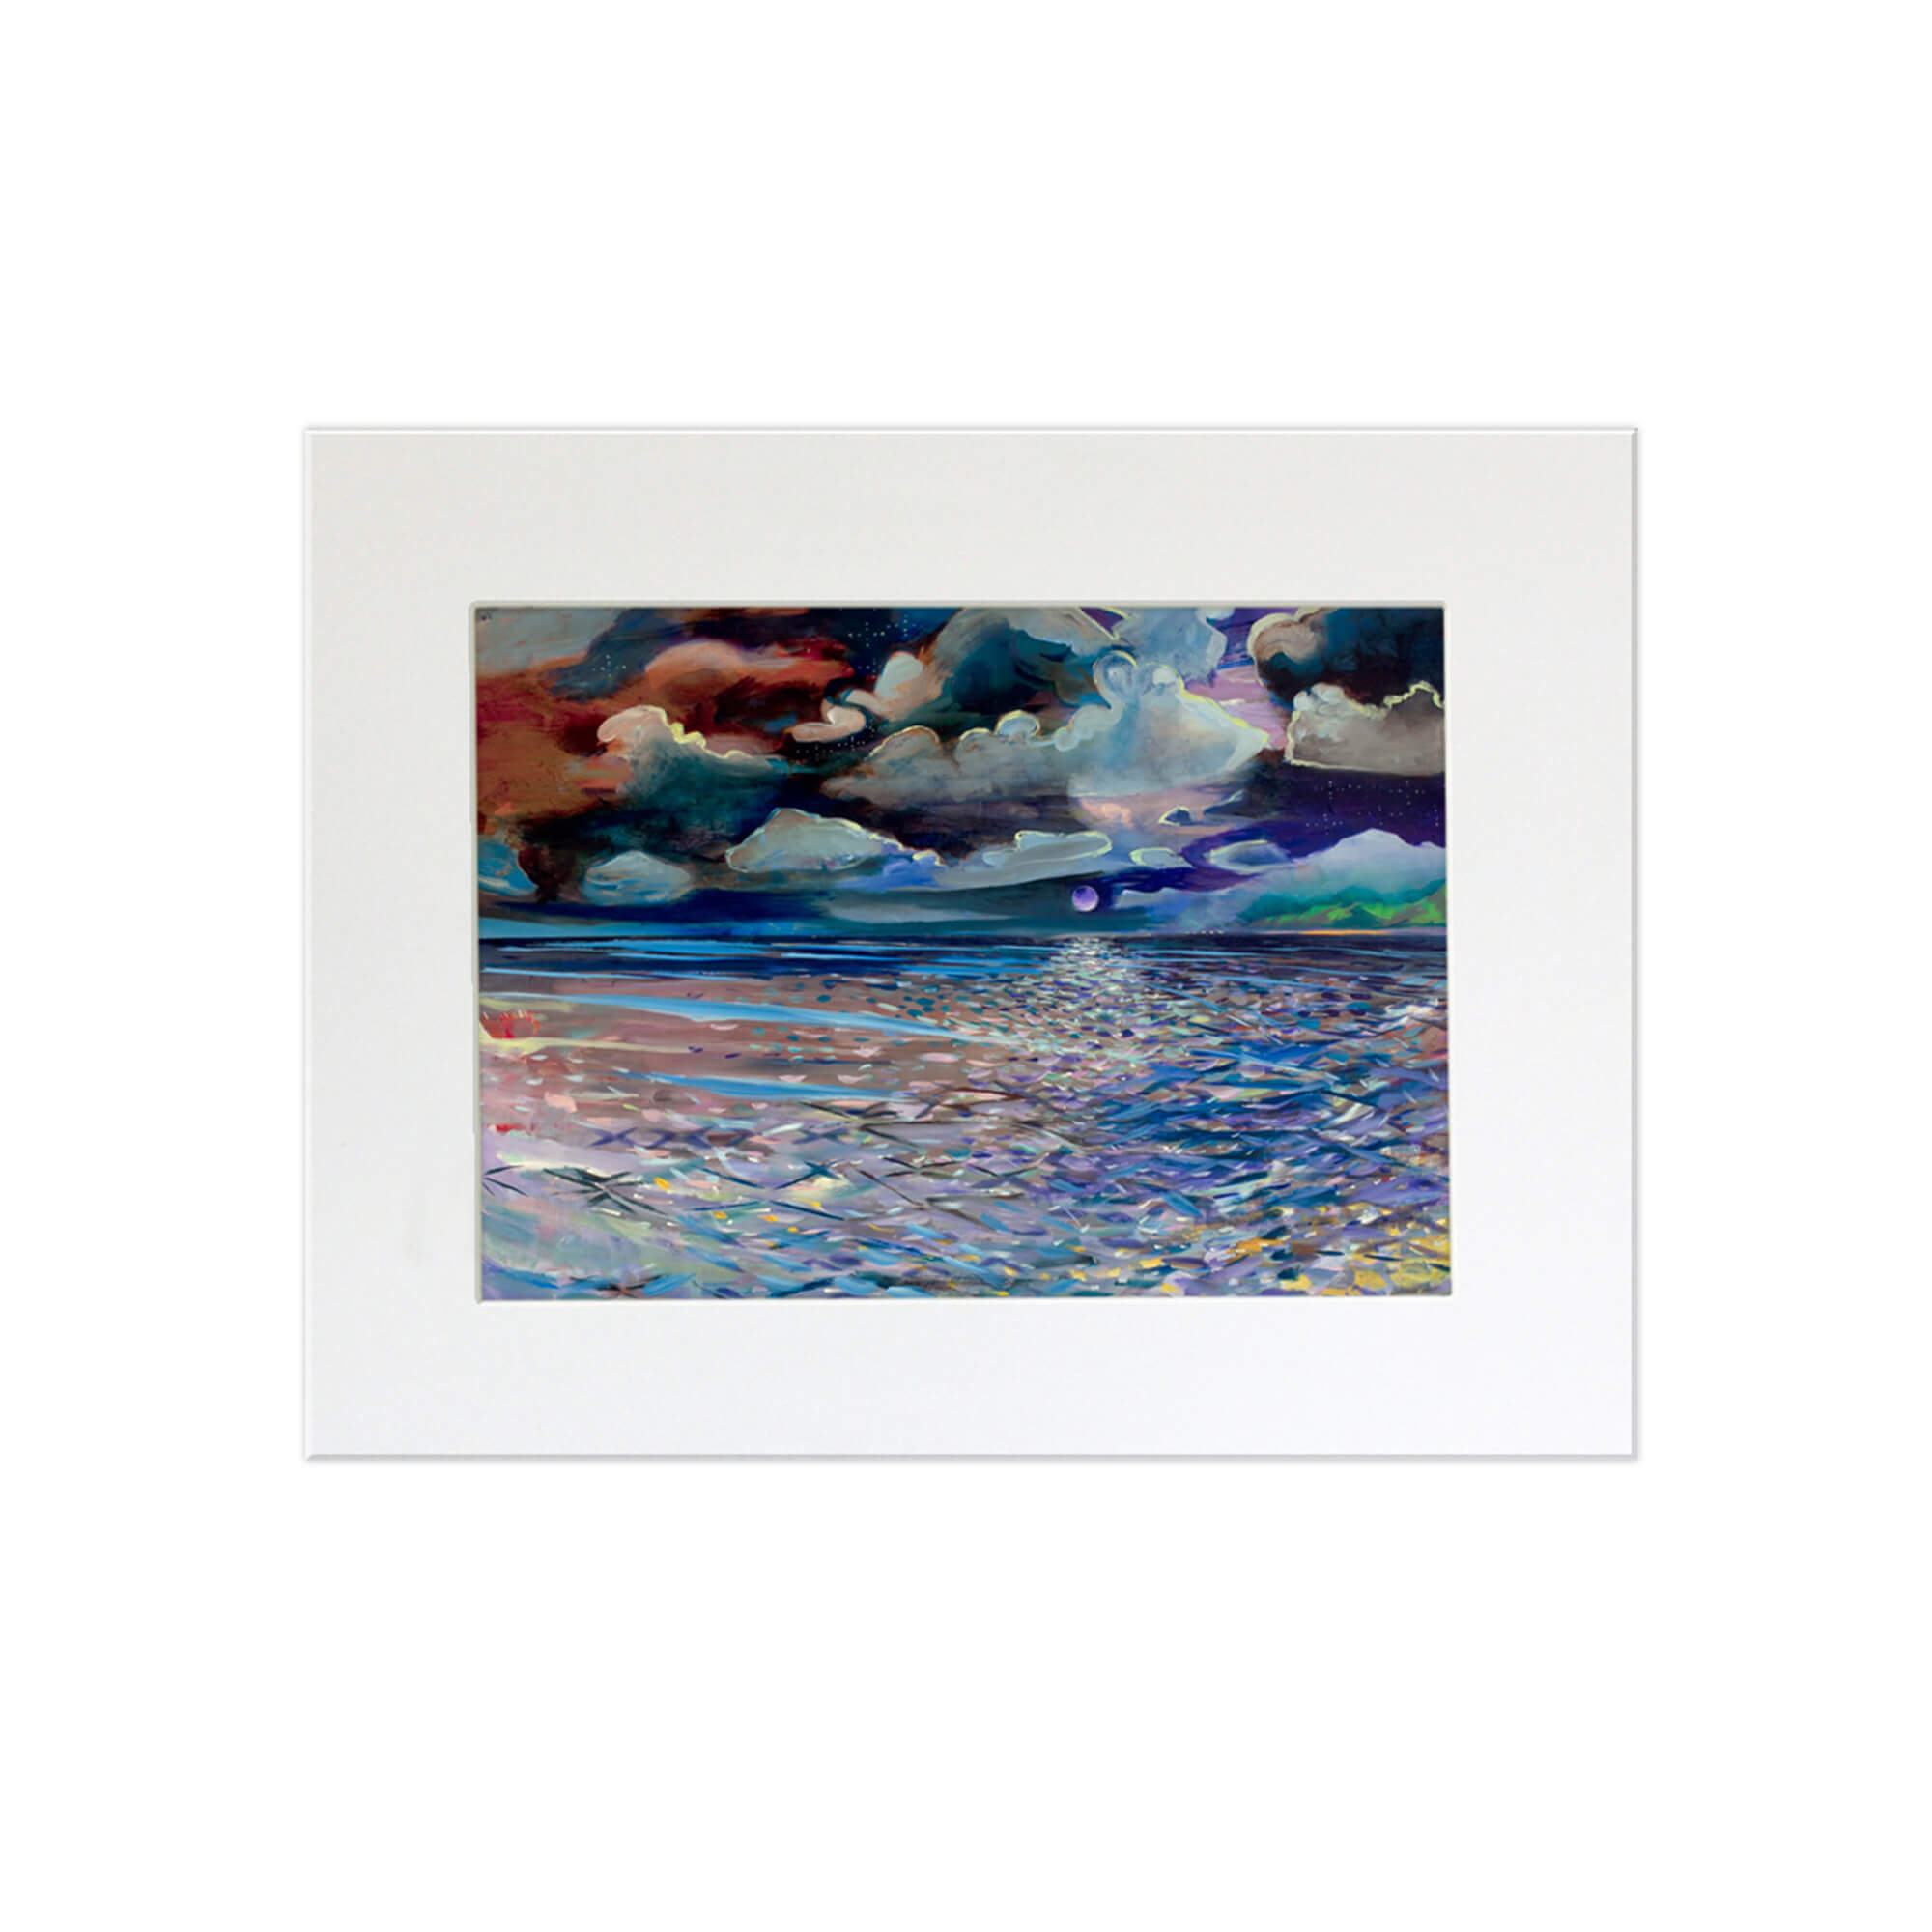 A matted art print of an abstract artwork depicting a full moon and a colorful seascape by Hawaii artist Saumolia Puapuaga